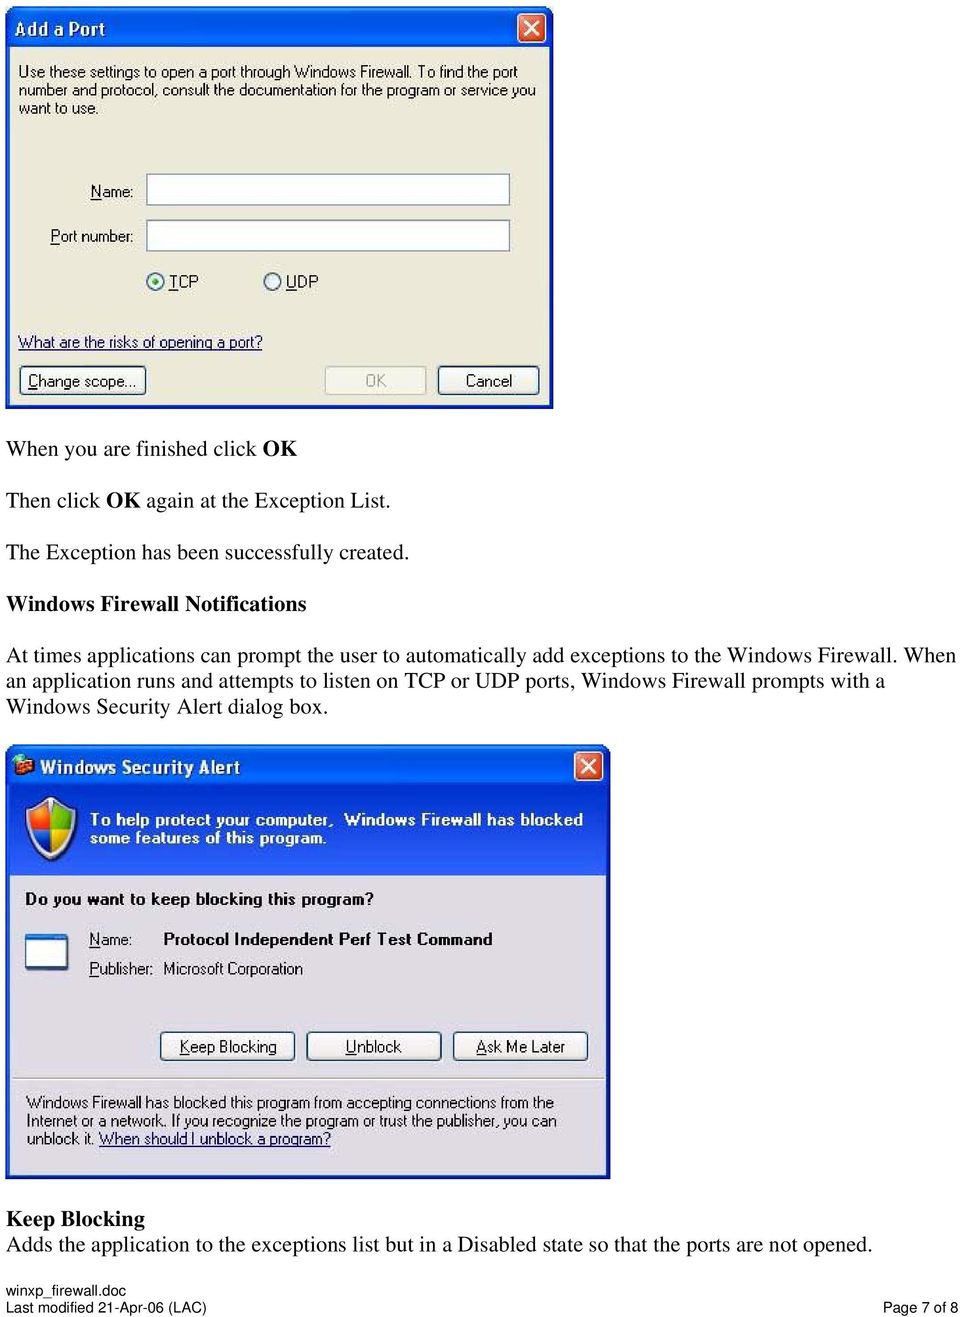 When an application runs and attempts to listen on TCP or UDP ports, Windows Firewall prompts with a Windows Security Alert dialog box.